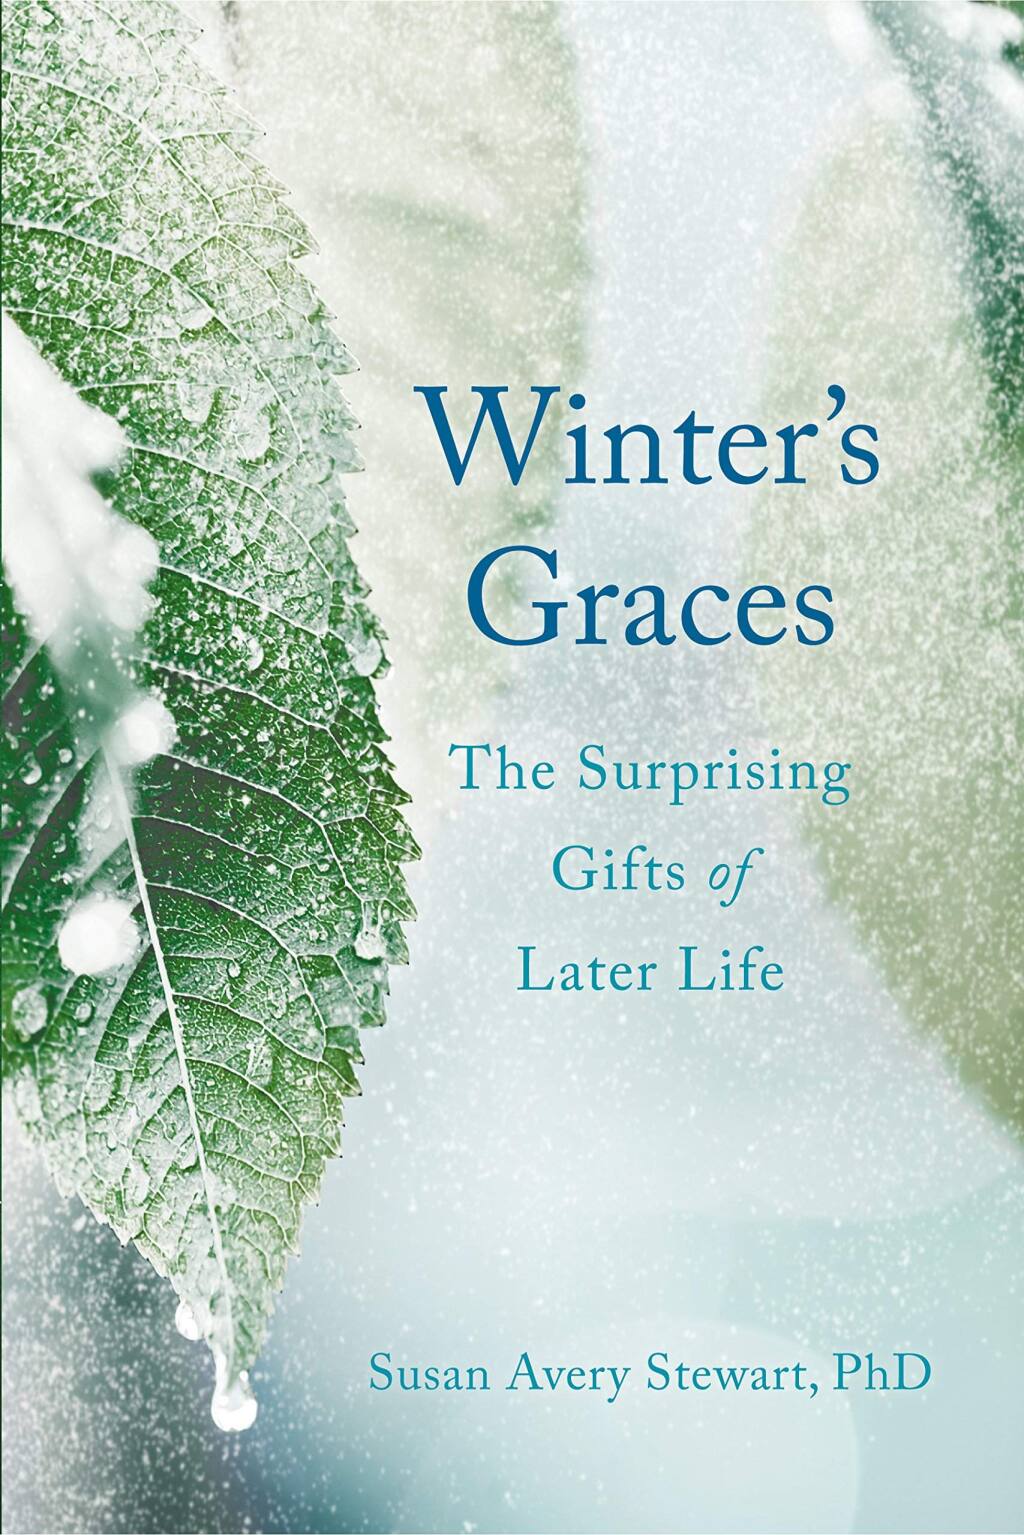 WINTER'S GRACES - The books by Petaluma author Susan Avery Stewart will be released in bookstores on October 9, and have its official book launch at the Petaluma Museum on Oct. 14.